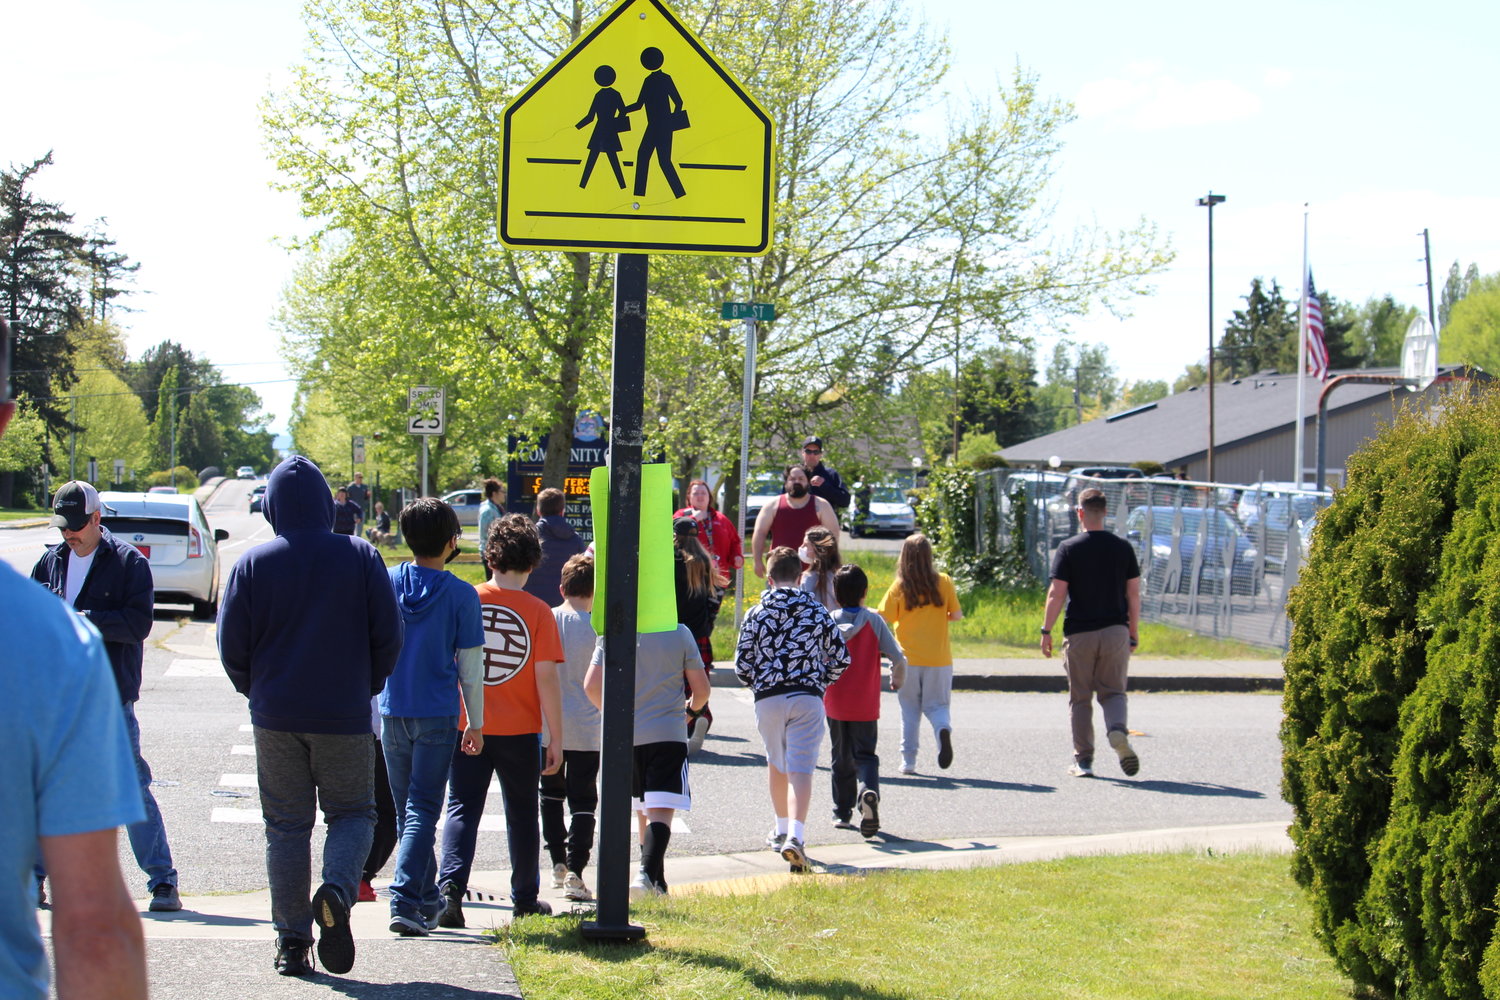 Blaine students escorted to the Blaine Boys and Girls Club on May 25.